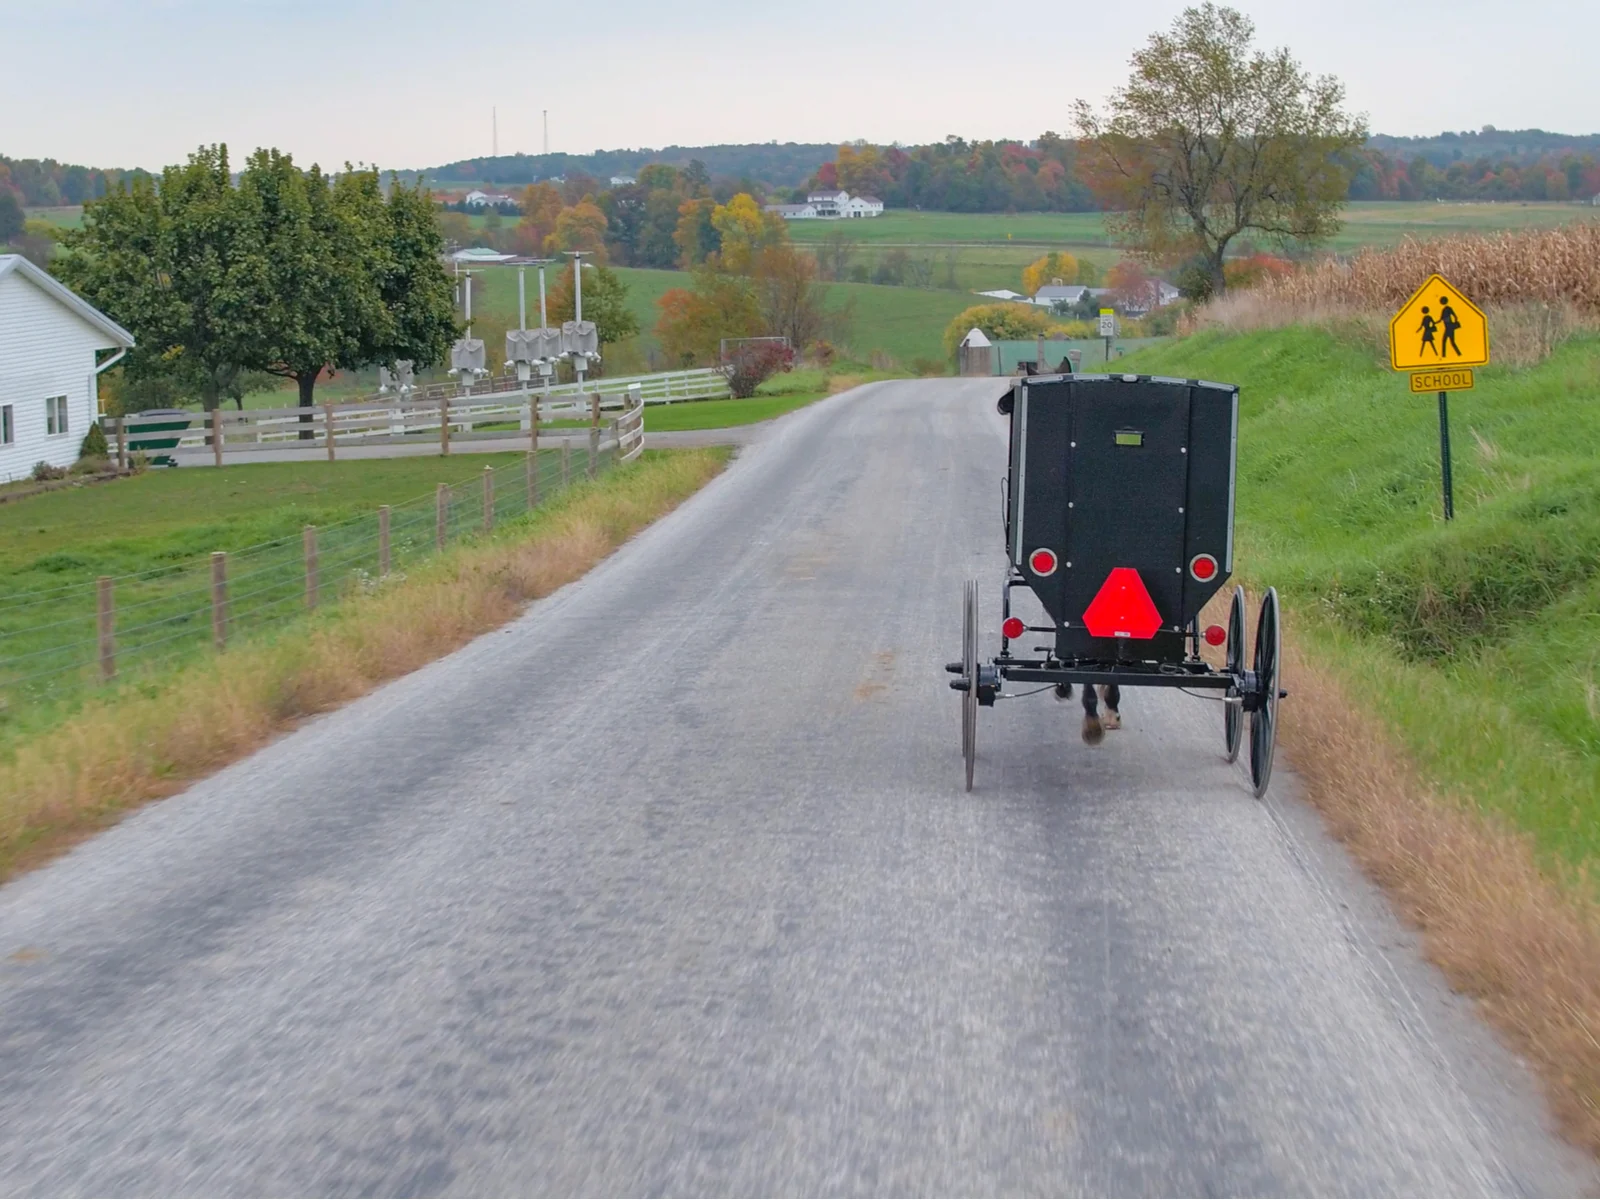 Horse and buggy in the countryside, something you might see while staying at the best Airbnb in Ohio